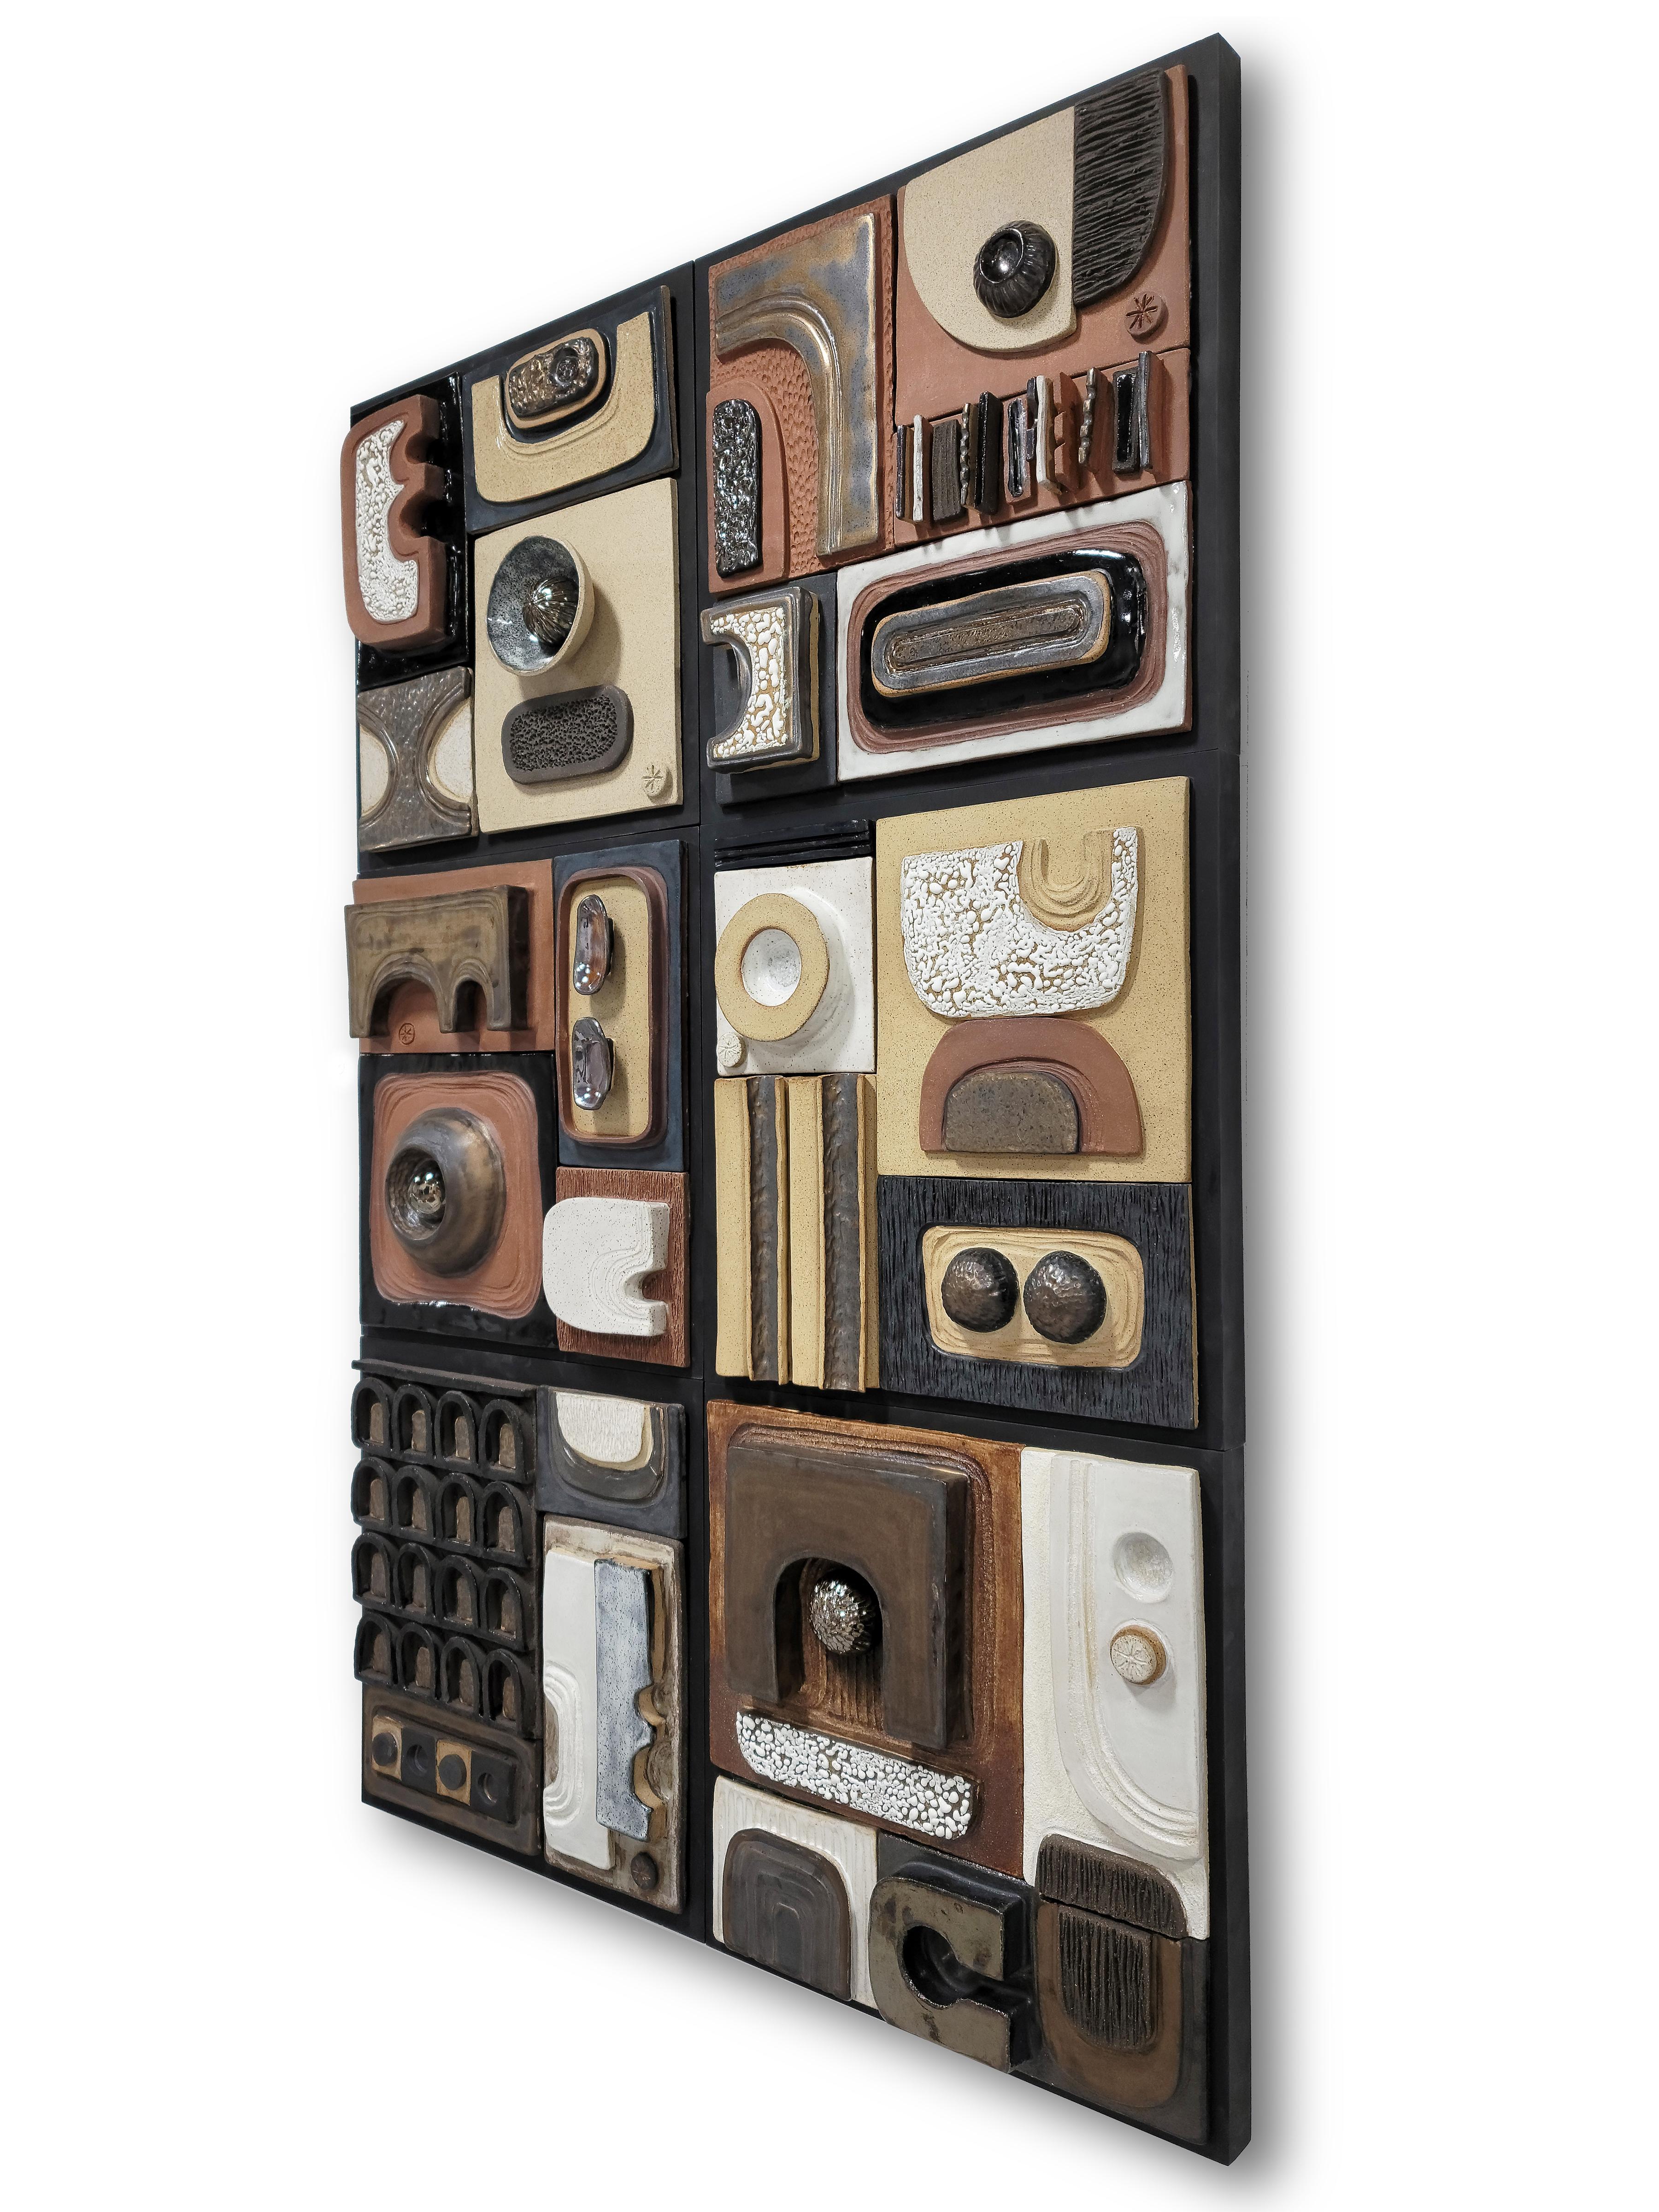 Trish DeMasi
Moderno wall installation, Architettura, 2021
Mixed glazed stoneware
Measures: 4 x 40 x 60 in (6 panels 4 x 20 x 20 in each)

Moderno collection. An exploration in building materials and forms. I combined different clay bodies,